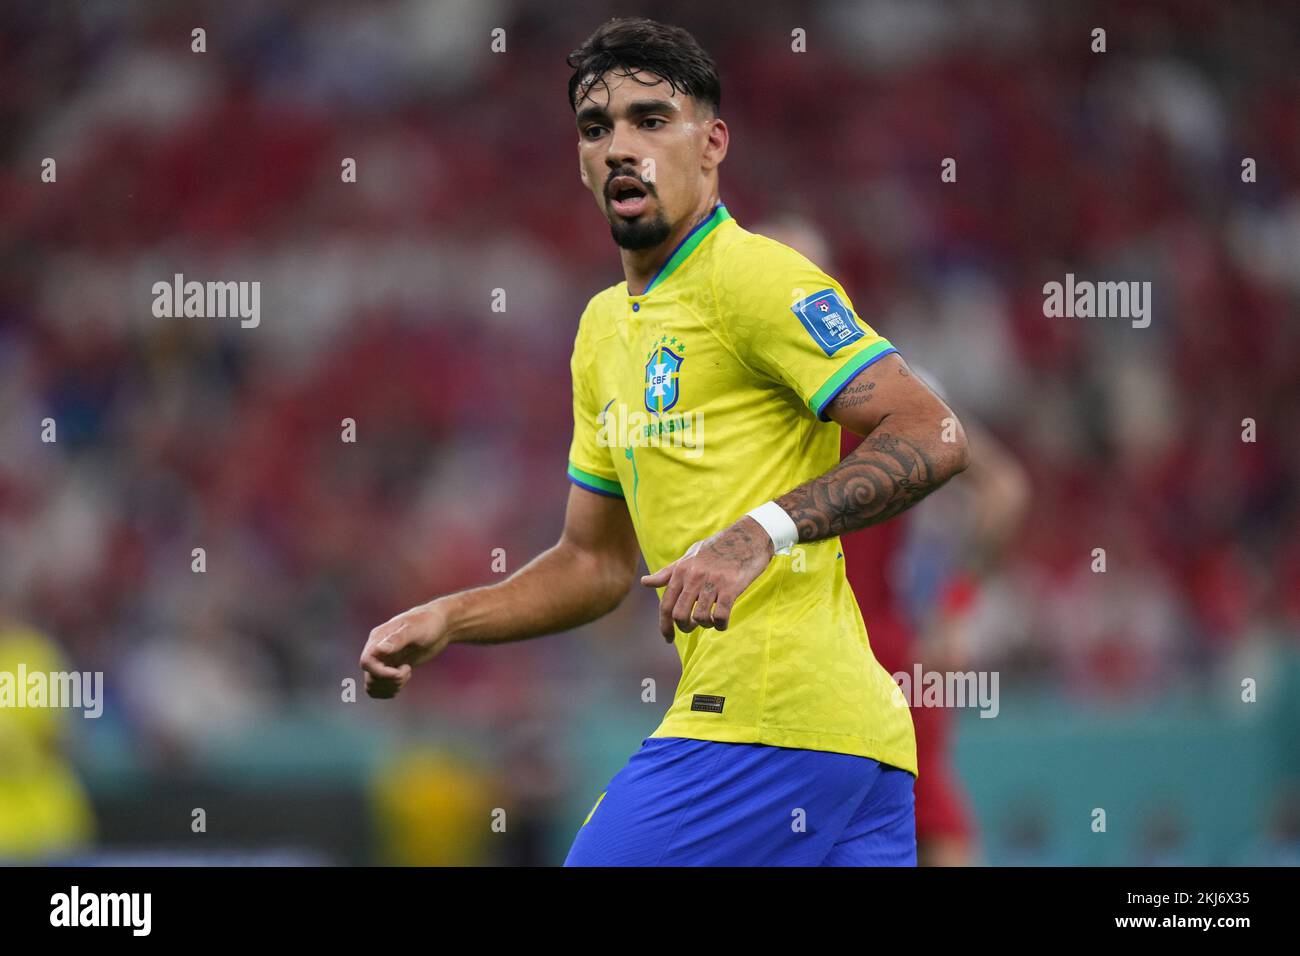 Lucas Paqueta of Brazil during the FIFA World Cup Qatar 2022 match, Group G, between Brazil and Serbia played at Lusail Stadium on Nov 24, 2022 in Lusail, Qatar. (Photo by Bagu Blanco / PRESSIN) Credit: PRESSINPHOTO SPORTS AGENCY/Alamy Live News Stock Photo